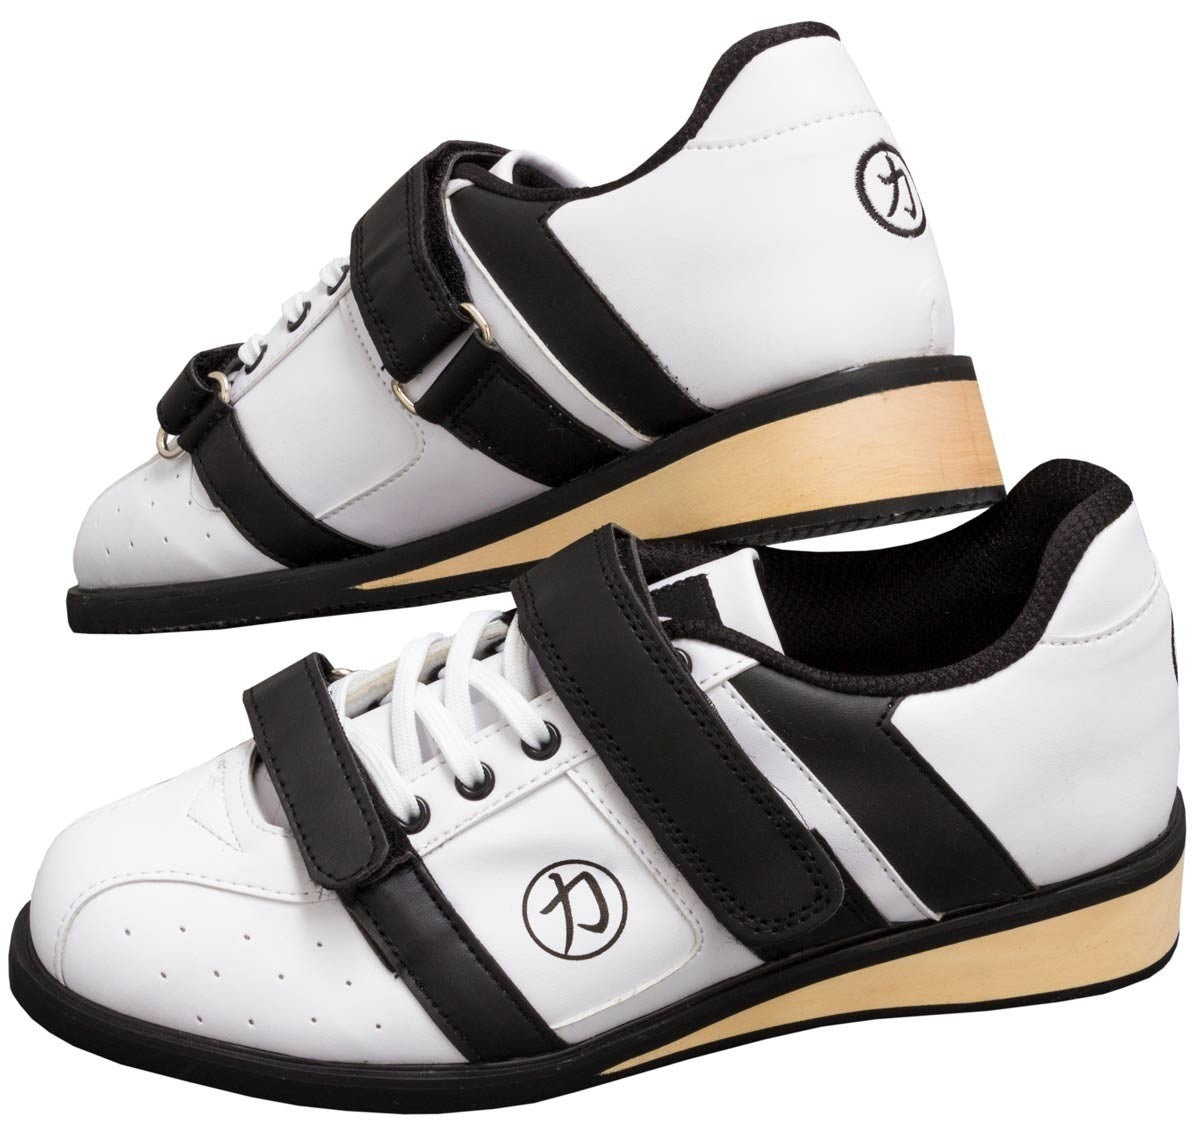 old weightlifting shoes